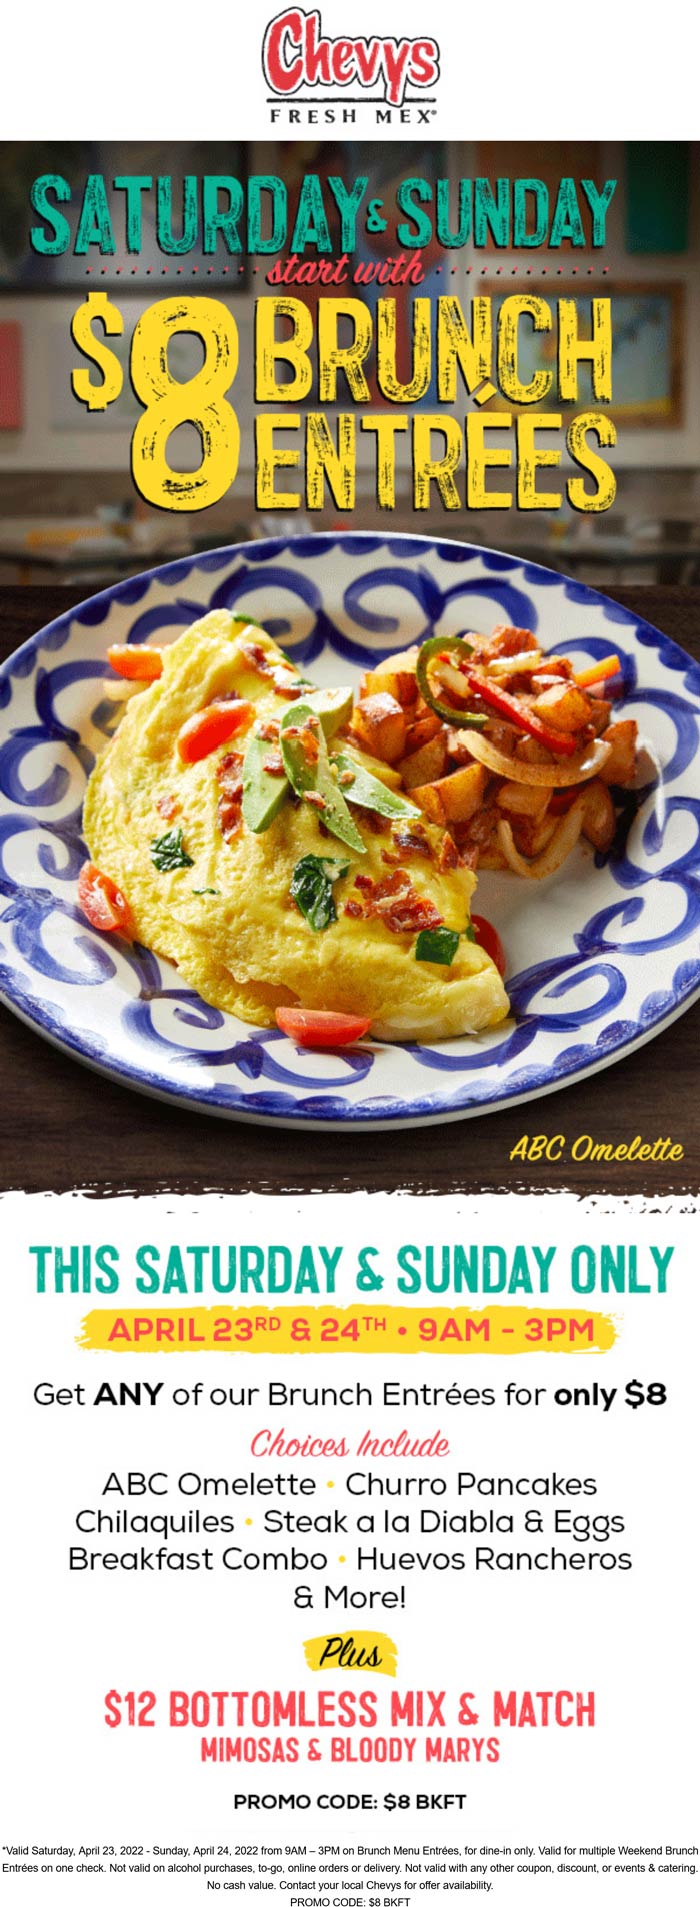 Chevys restaurants Coupon  $8 brunch this weekend at Chevys Fresh Mex restaurants #chevys 